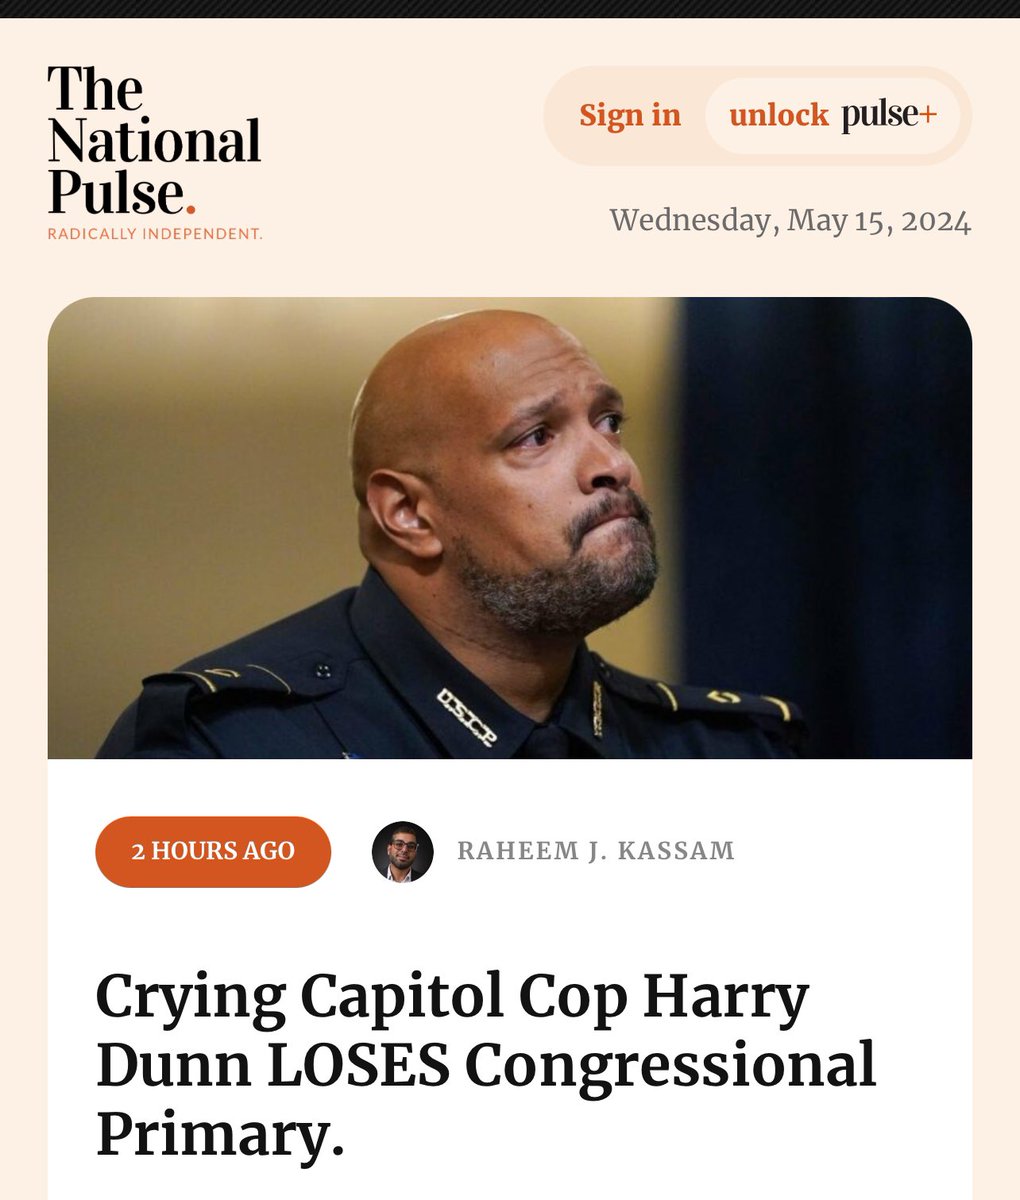 Harry Dunn — the far left Capitol Hill police officer who has cried repeatedly in public over his role in January 6th — has lost his Congressional primary. It is unknown as to whether or not he cried upon hearing the news Dunn had the endorsements of Nancy Pelosi, Adam Schiff &…